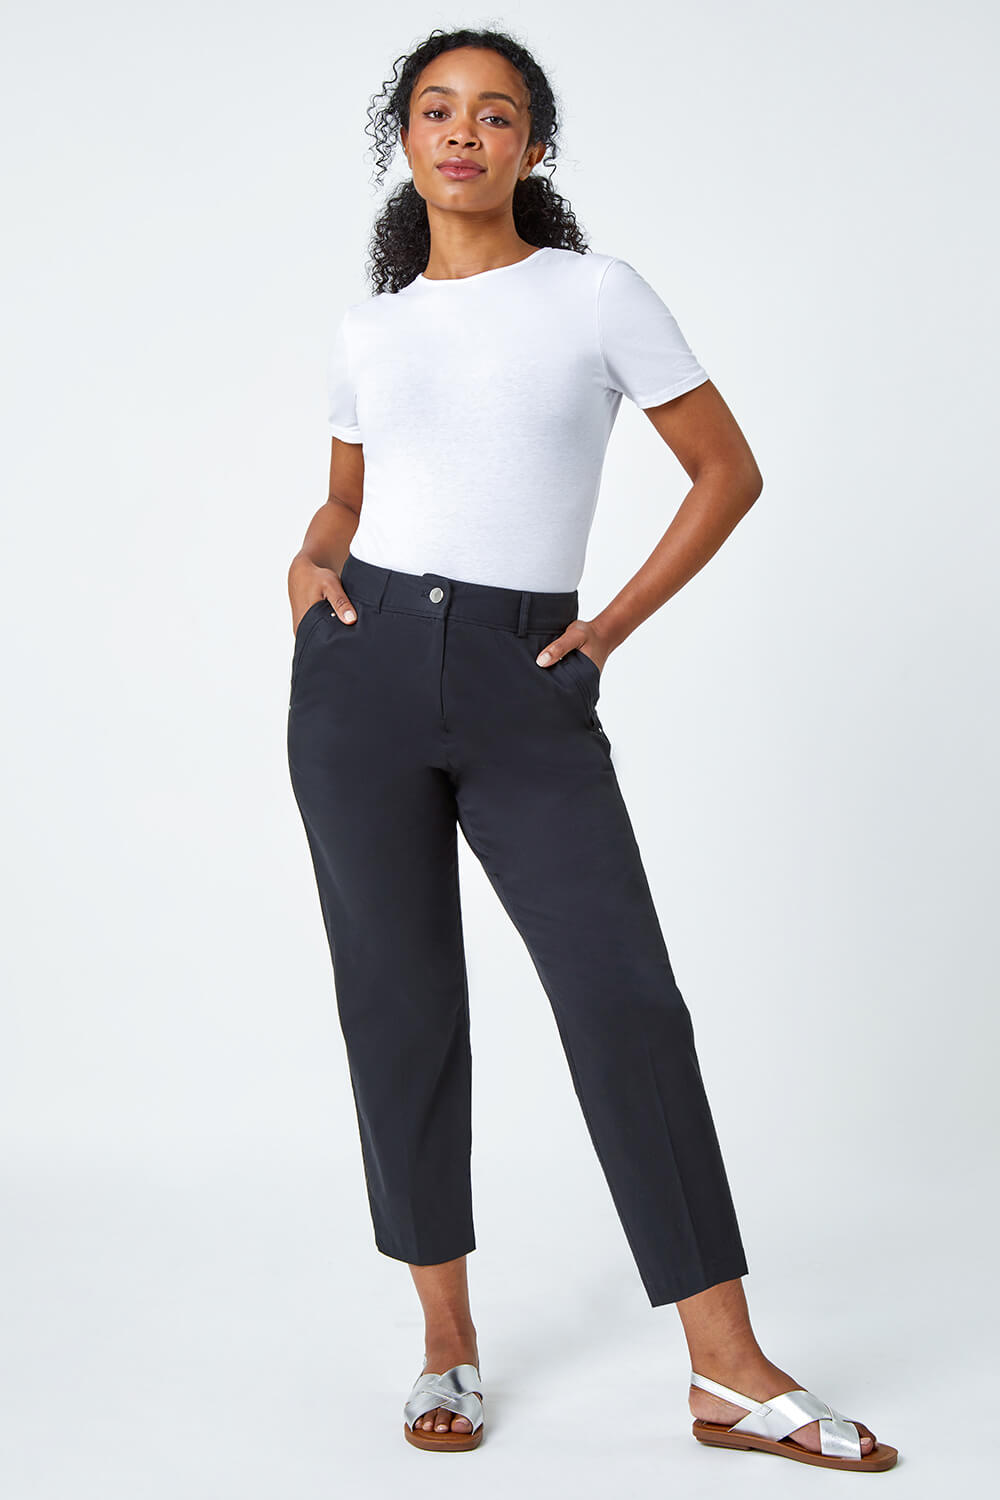 Black Petite Cotton Blend Stretch Trousers, Image 2 of 5